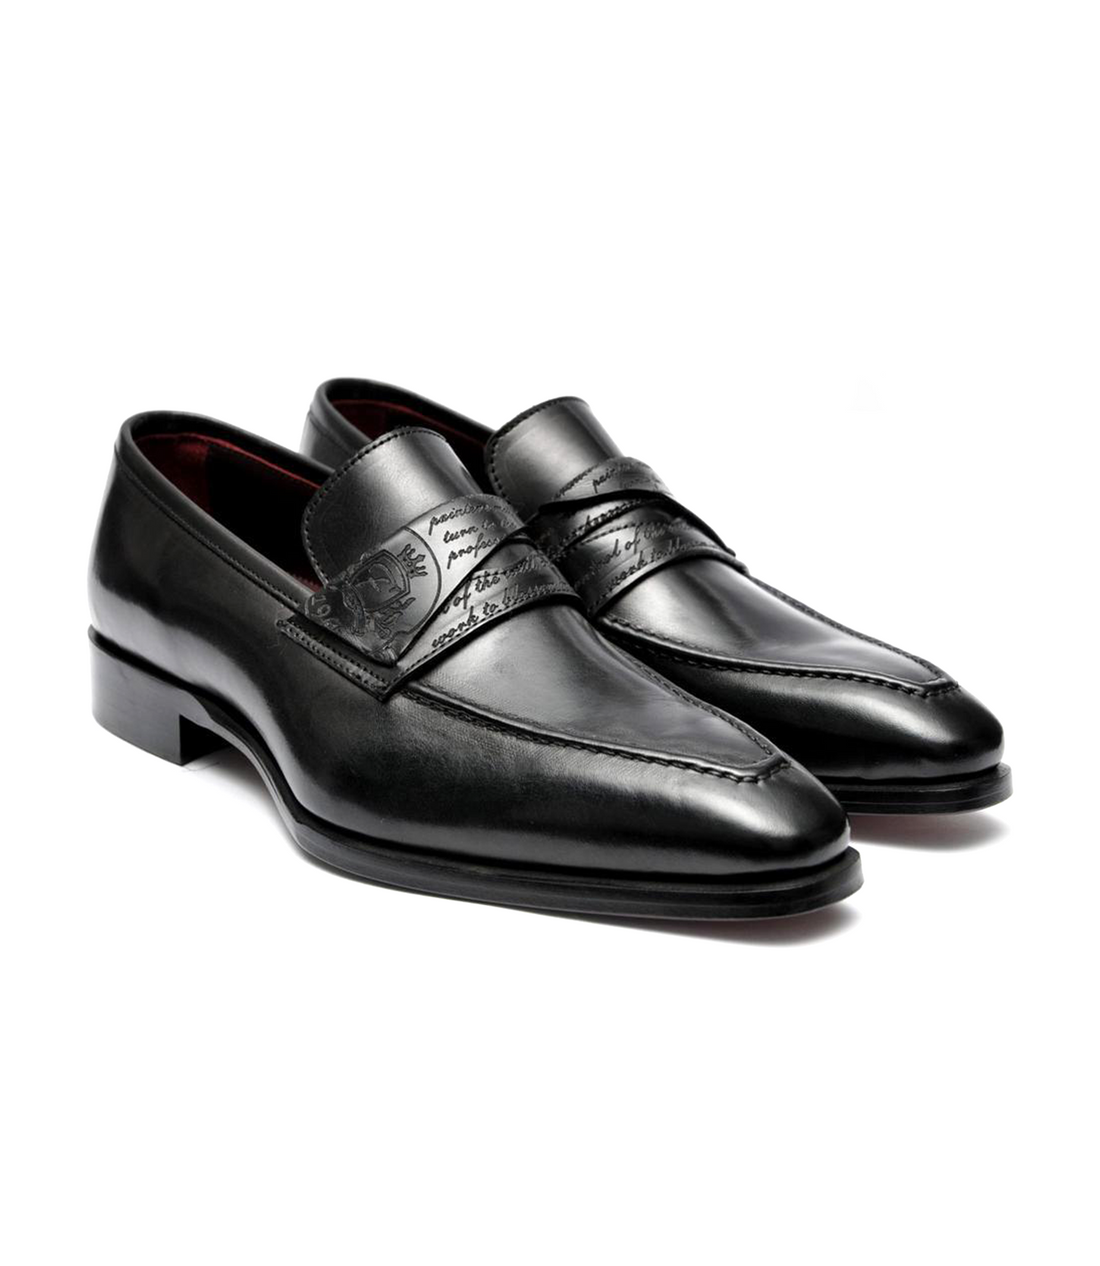 FILANGIERI - BLACK LEATHER DRESS LOAFERS WITH CURSIVE ON IN-STEP